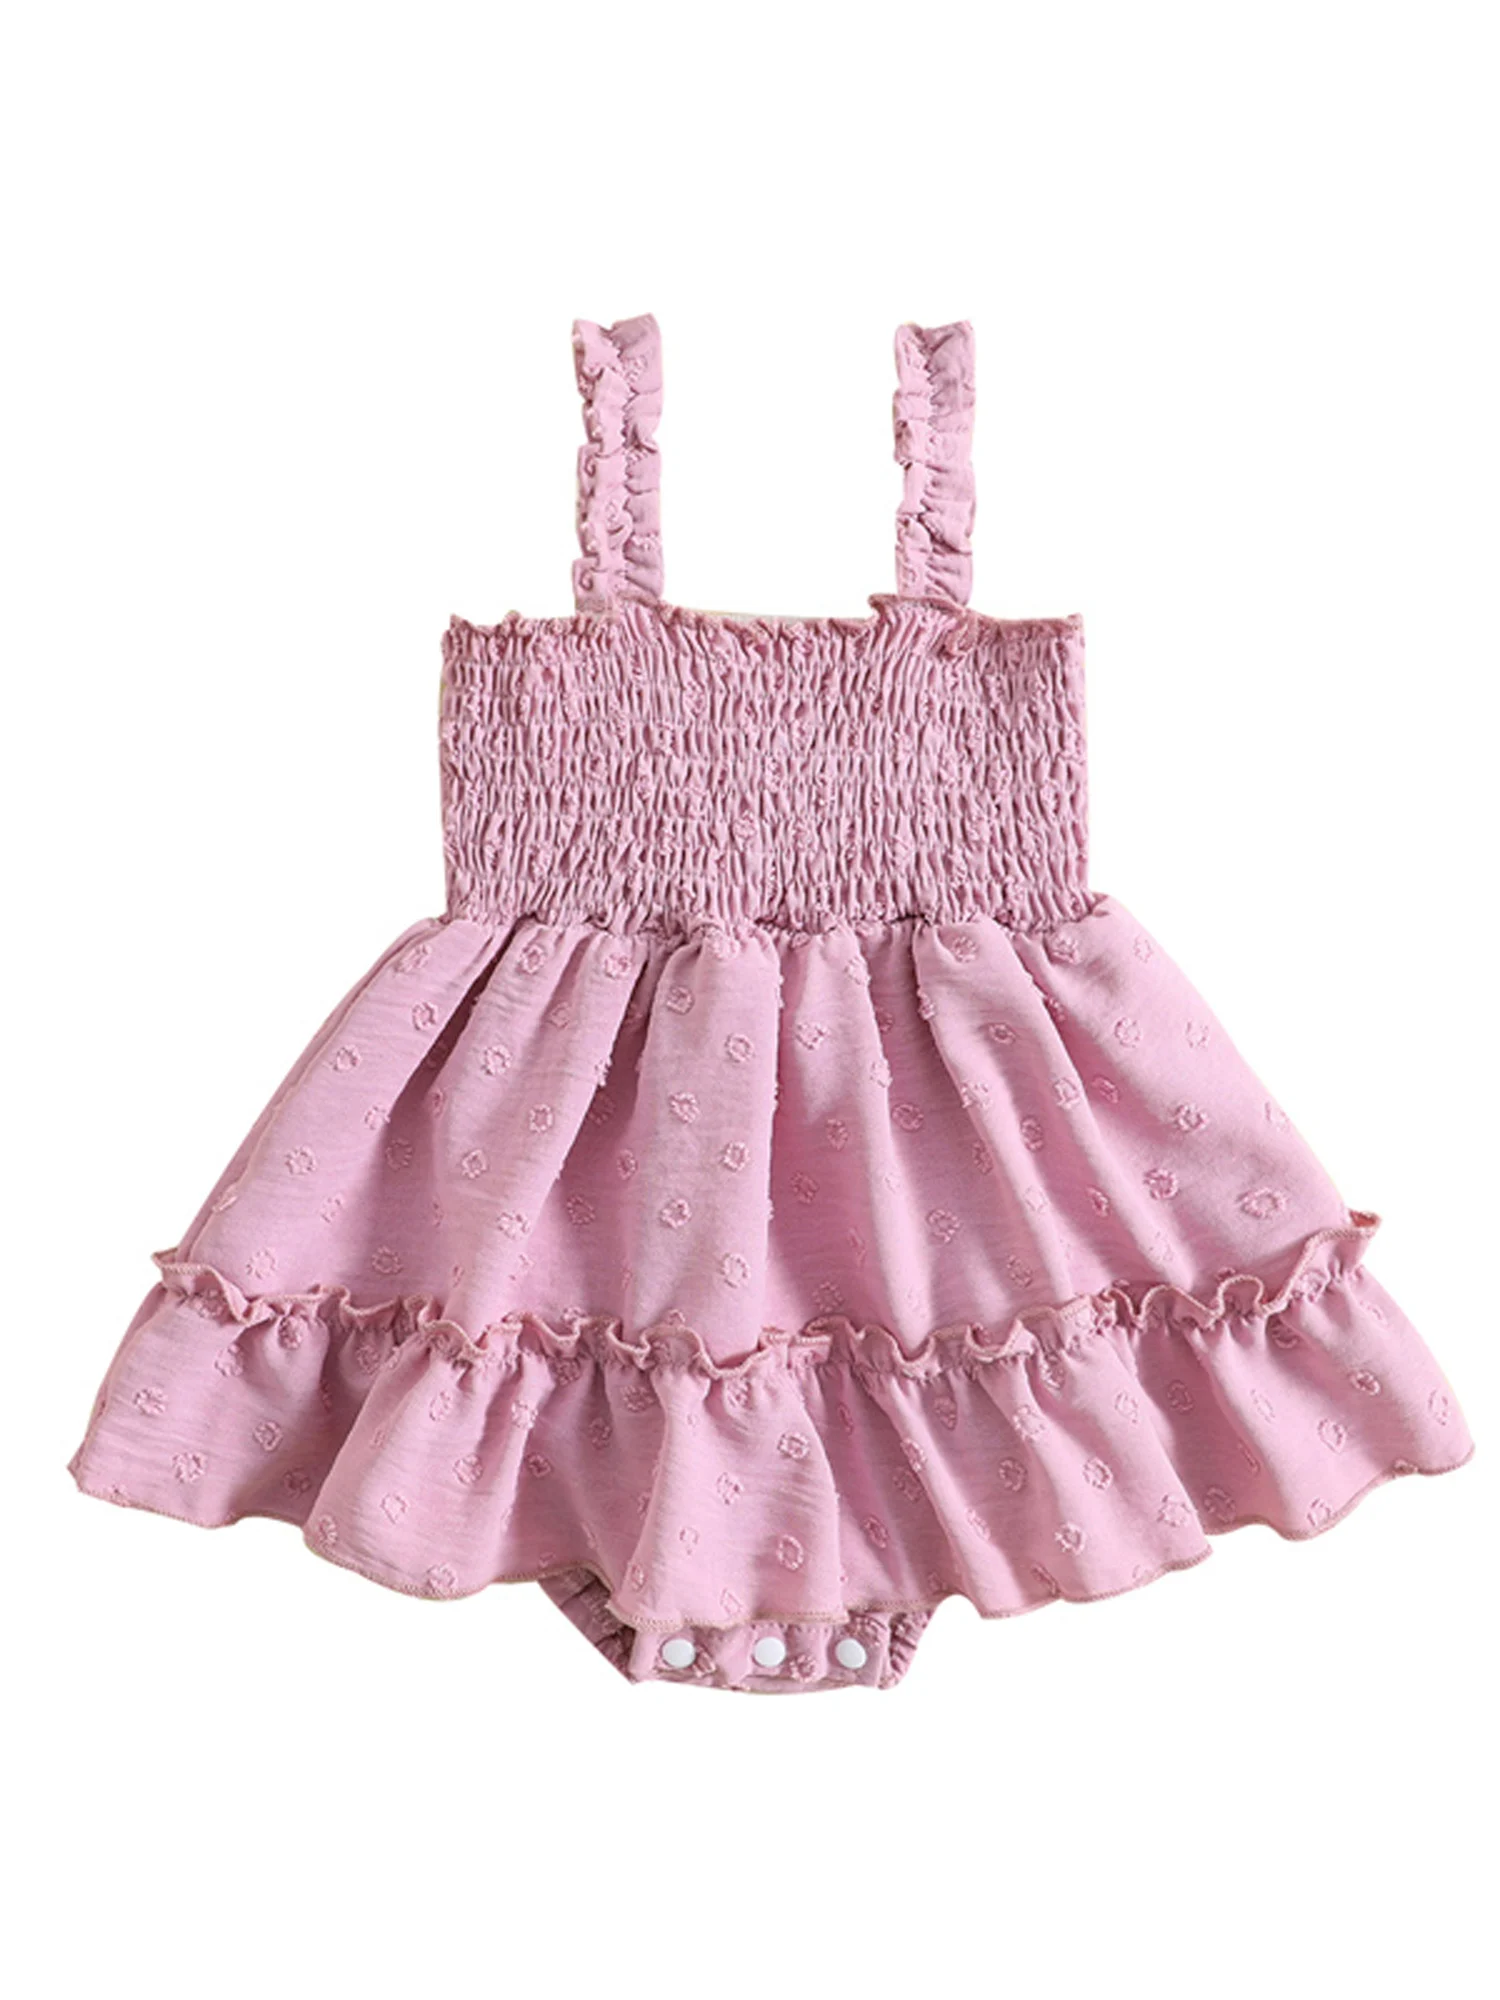 

Toddler Infant Baby Girls Princess Dress Sleeveless Floral Lace Bowknot Pageant Tutu Gown Formal Dance Birthday Wedding Party